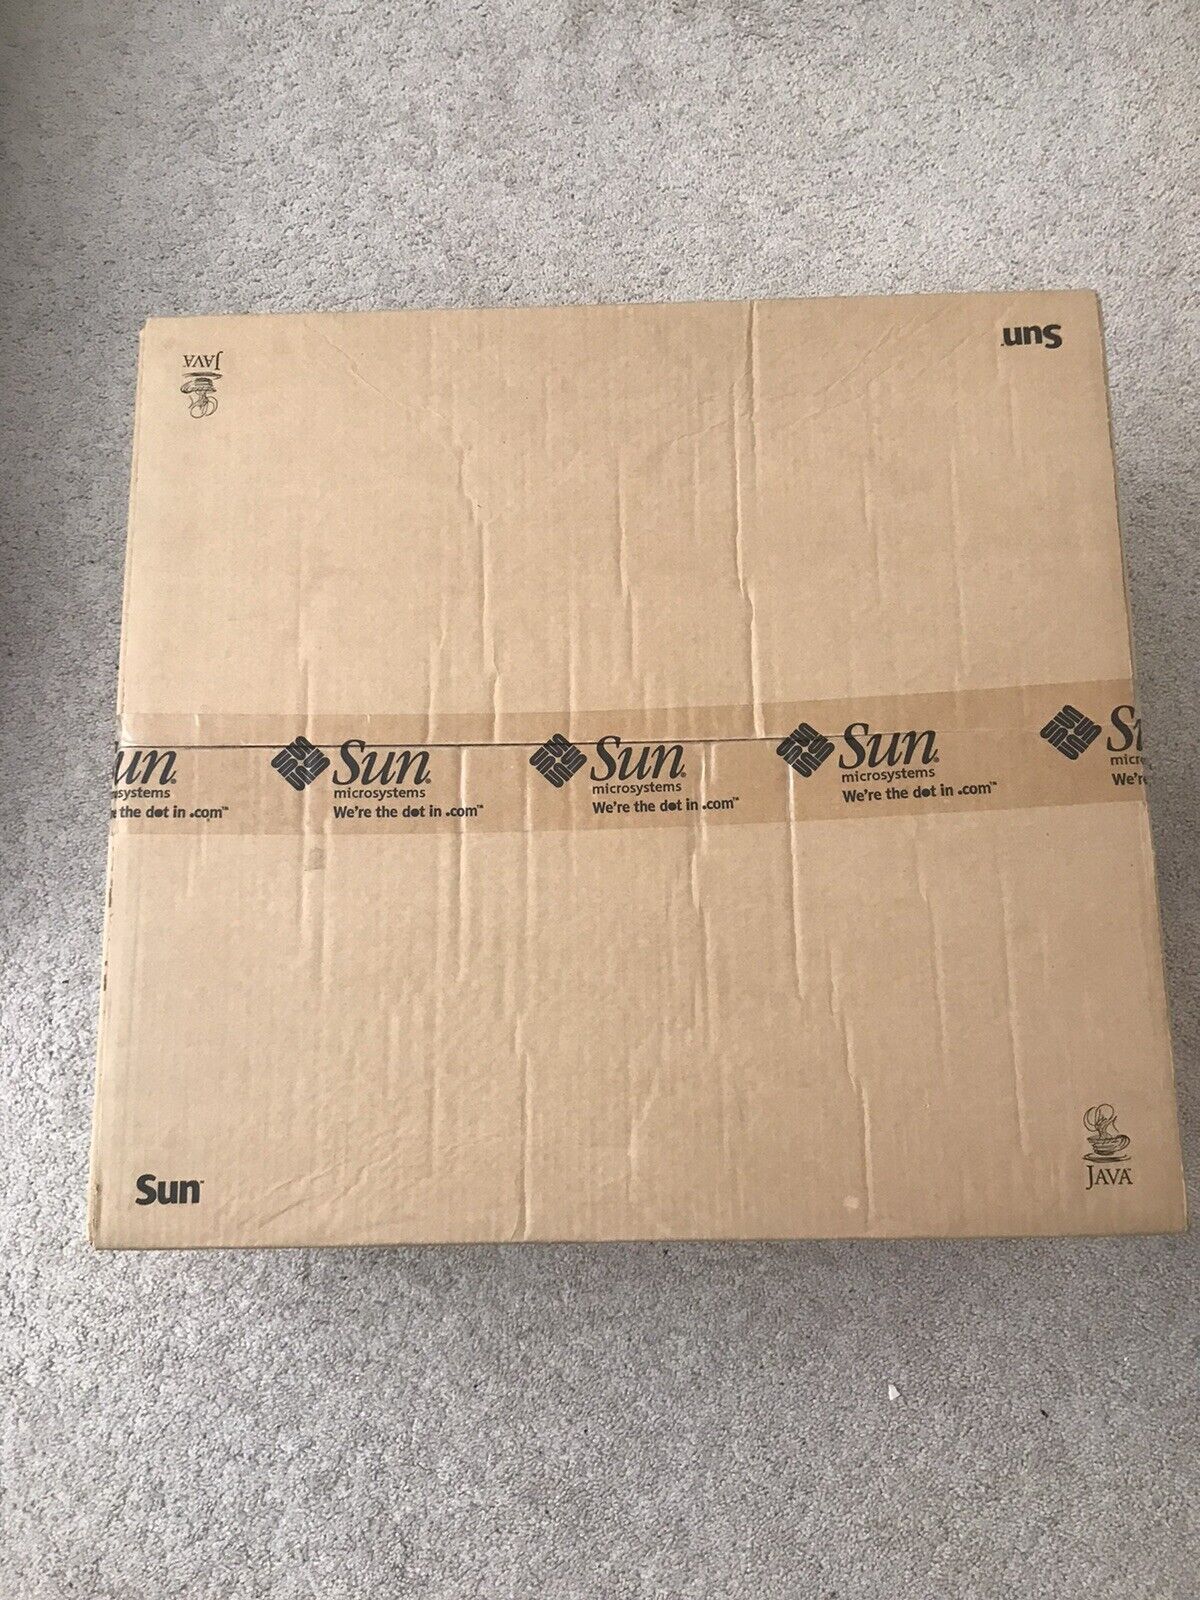 *NEW* Sun Blade 100 workstation in its original box. (no Keyboard nor Mouse)